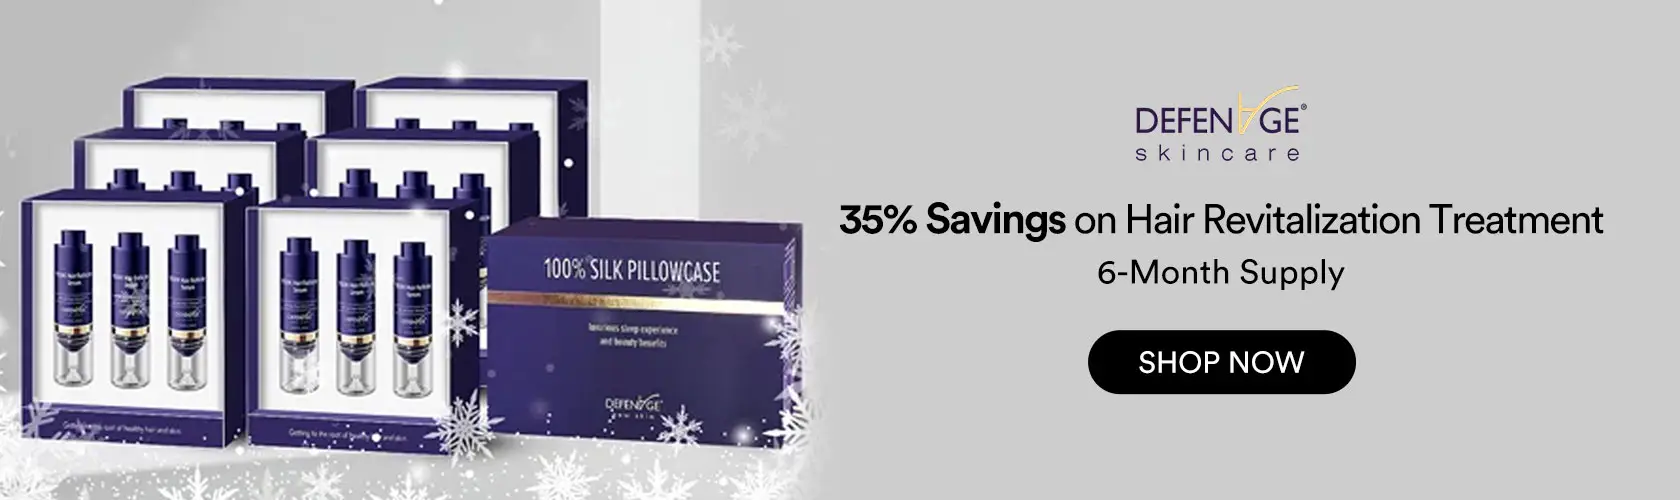 DefenAge: 35% Savings on Hair Revitalization Treatment, 6-Month Supply